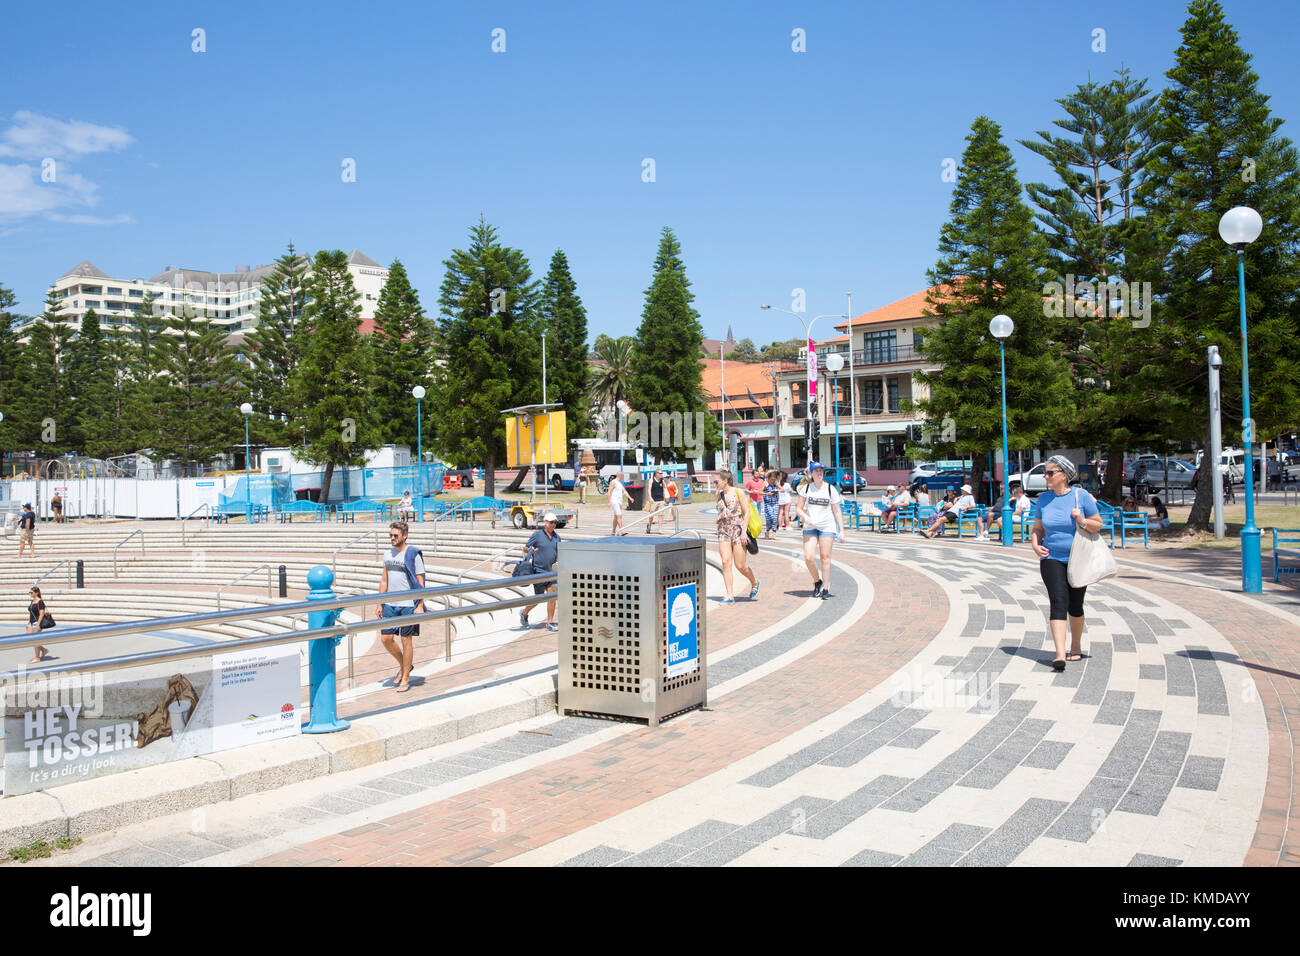 Coogee beach town centre and circular steps leading down to the beach,Sydney,Australia Stock Photo